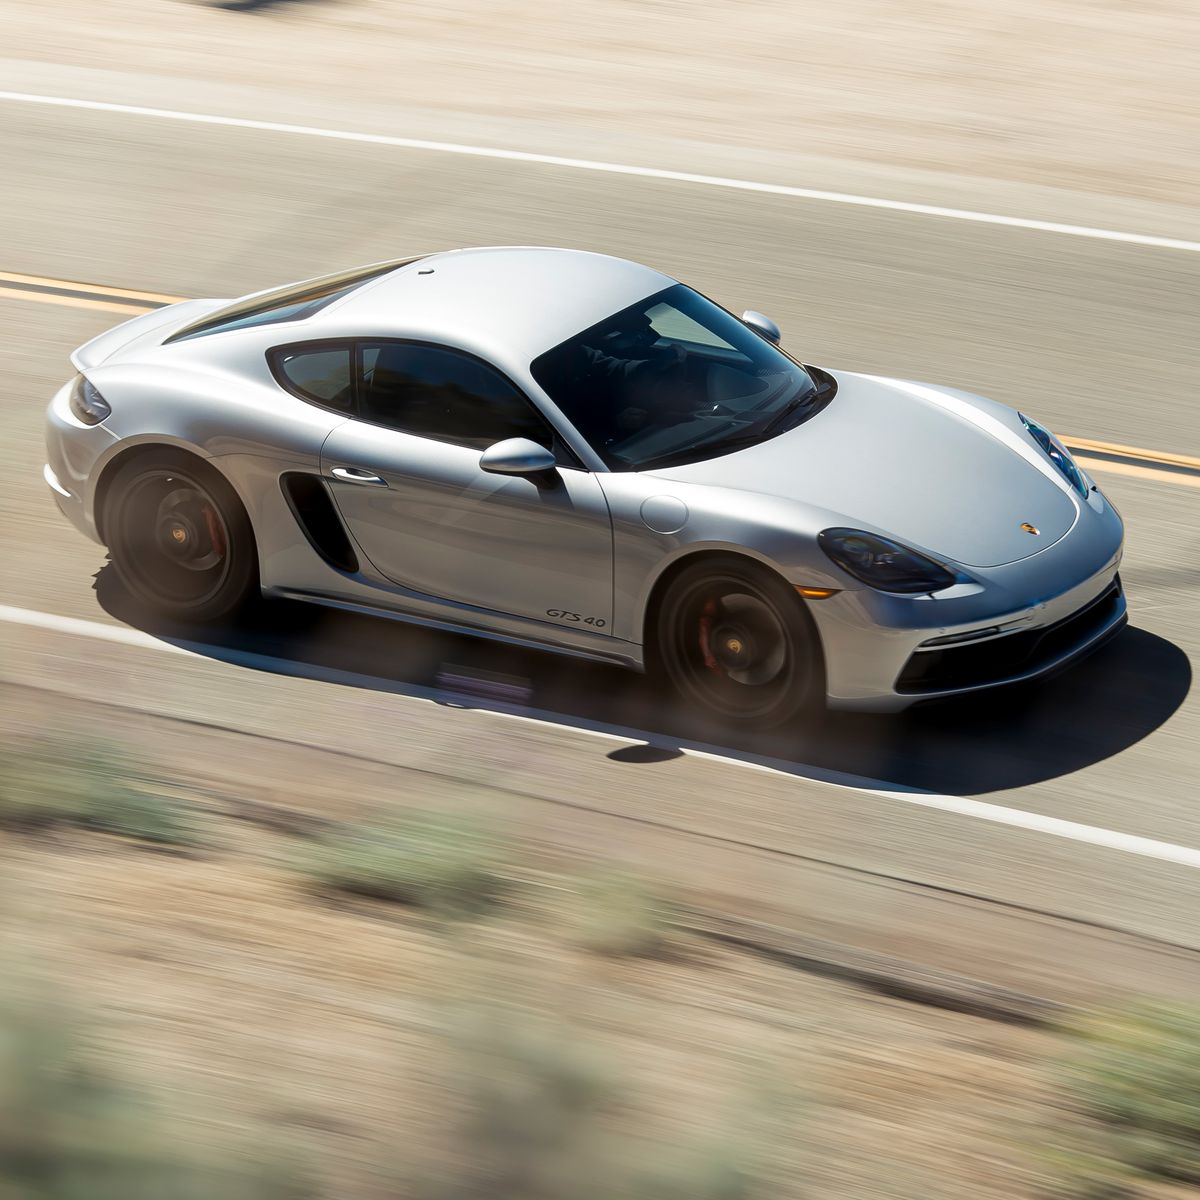 Tested: 2021 Porsche 718 Cayman GTS 4.0 Manual Delights the Soul